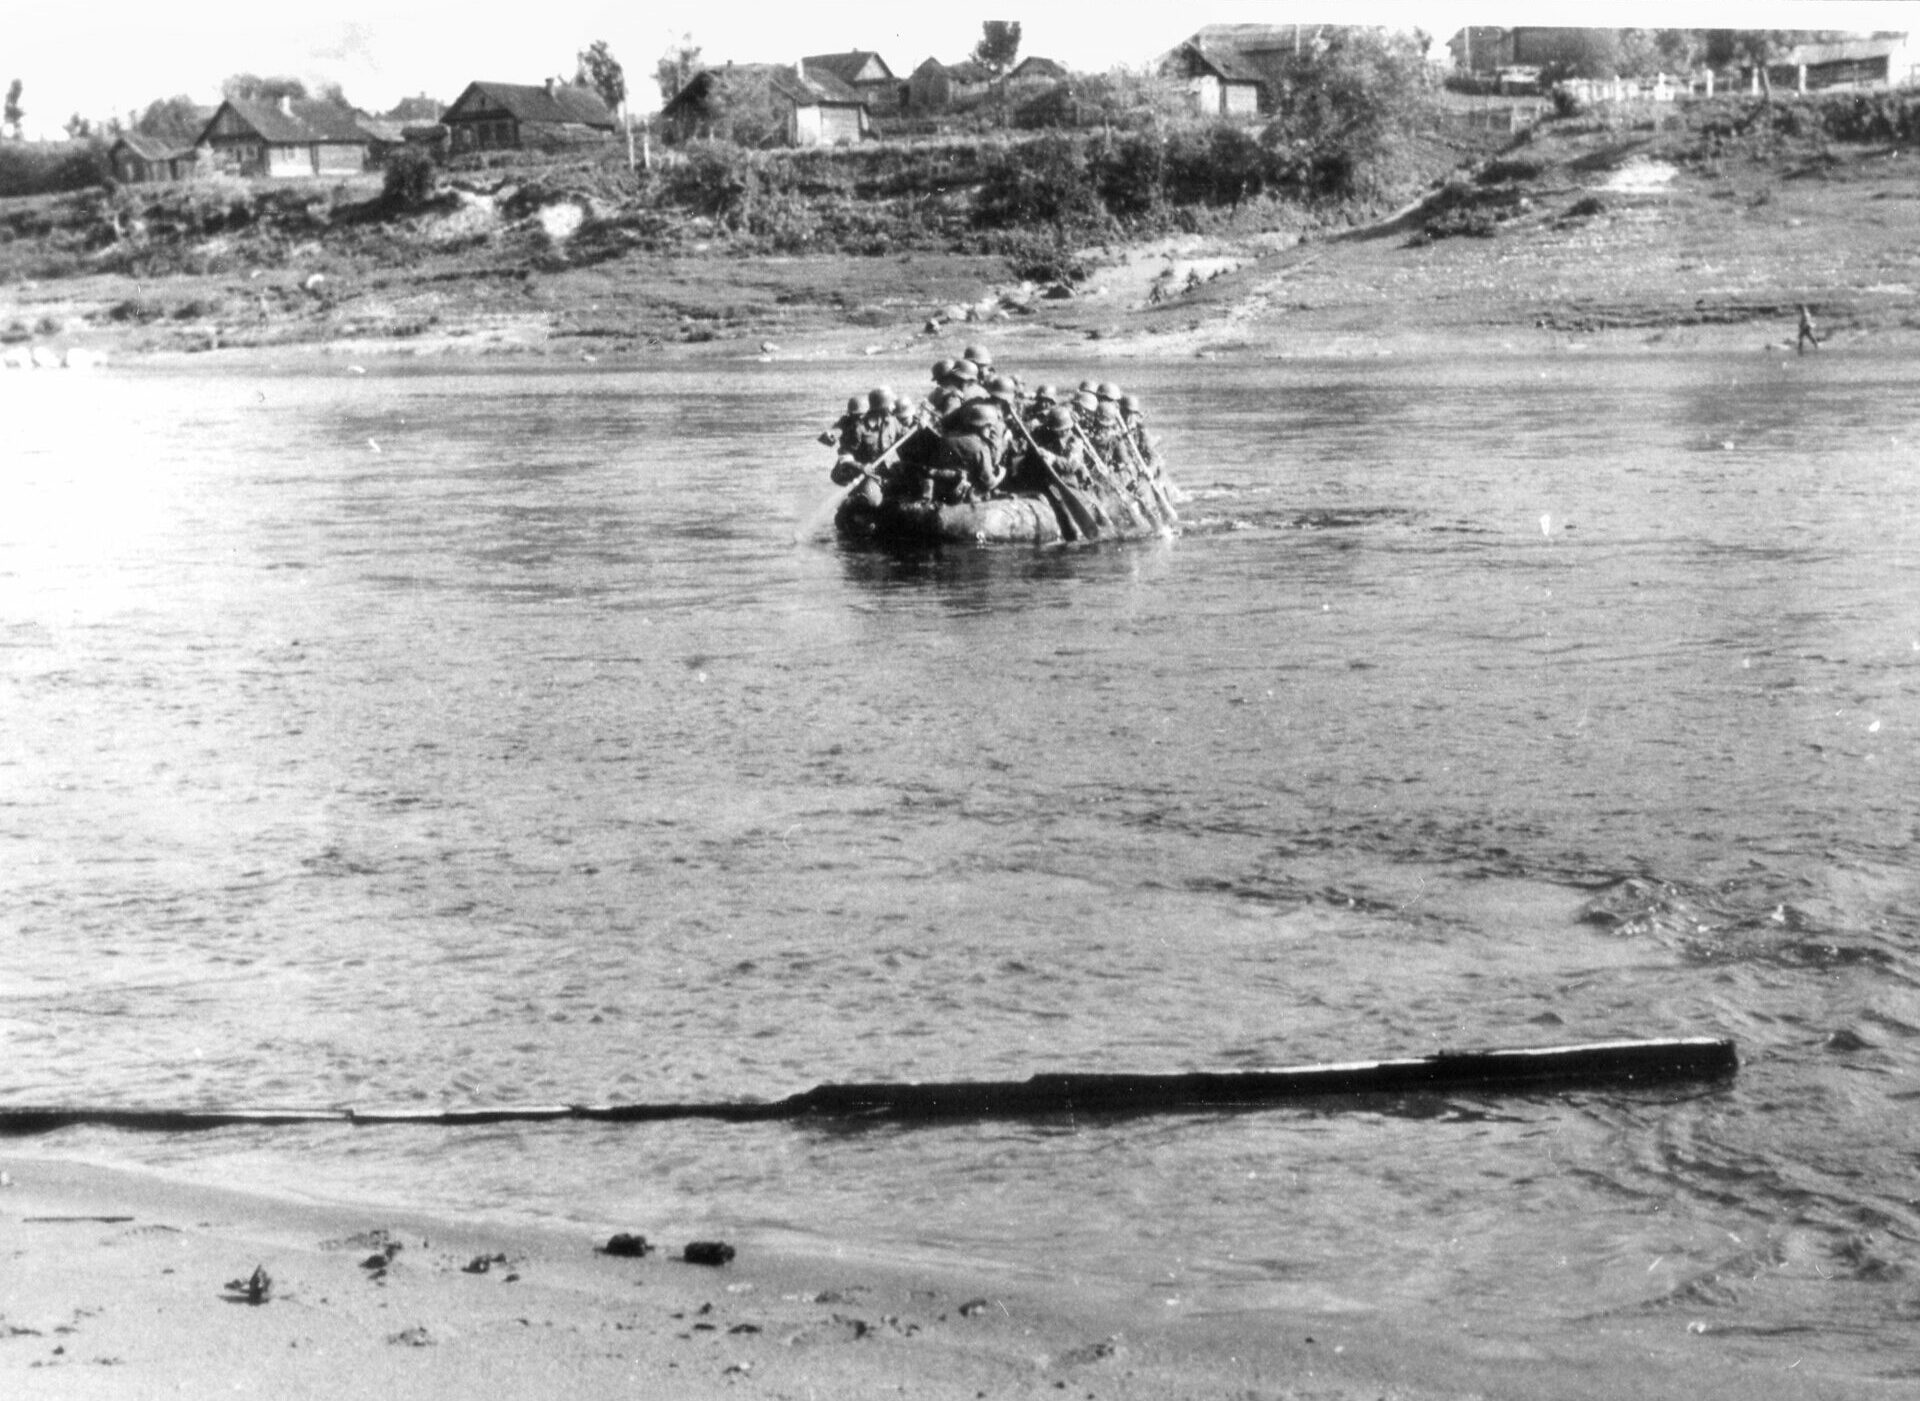 With few available bridges, German troops used inflatable rubber boats to cross the many rivers and streams of the Soviet Union. 